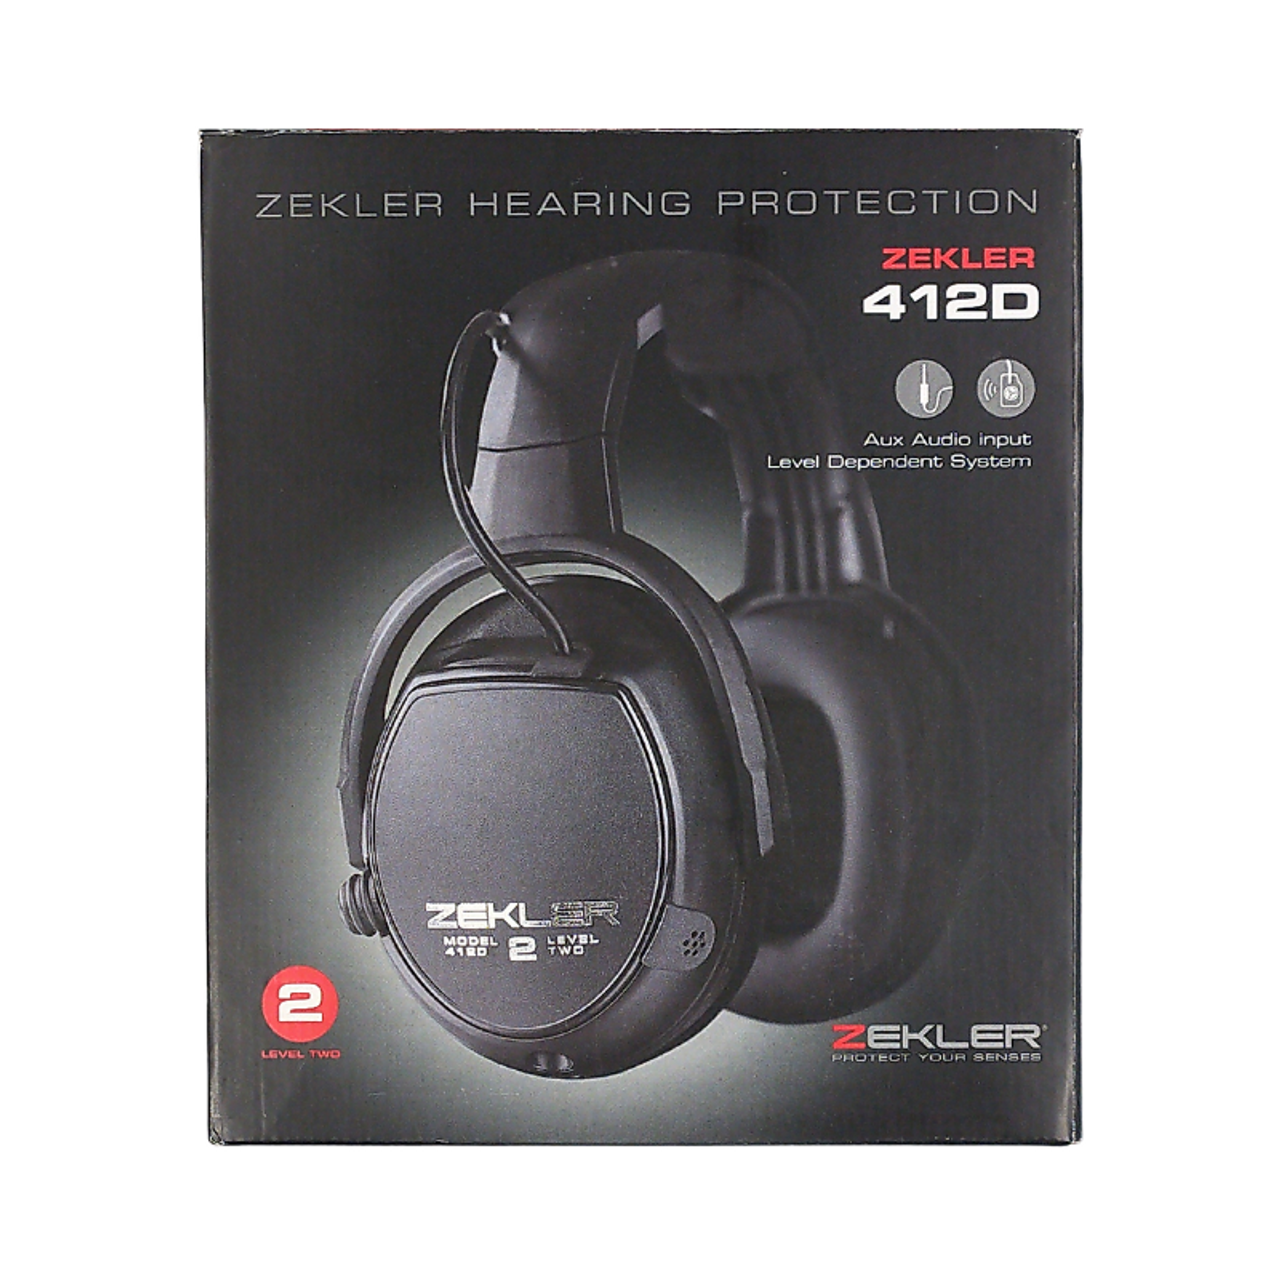 ZEKLER Ear Muffs | Where to find 412 D Class 2 AUX Input, Level Dependent System  for Over Head, Workshops, Machinery Operator, Riggers, Trade Supplies and Electricians